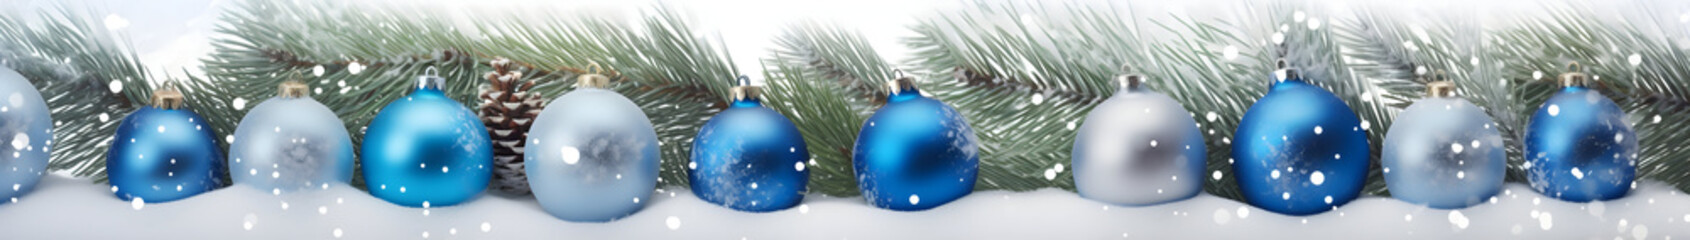 Blue Christmas balls in a row with spruce branches covered with snow and snowfall on white...